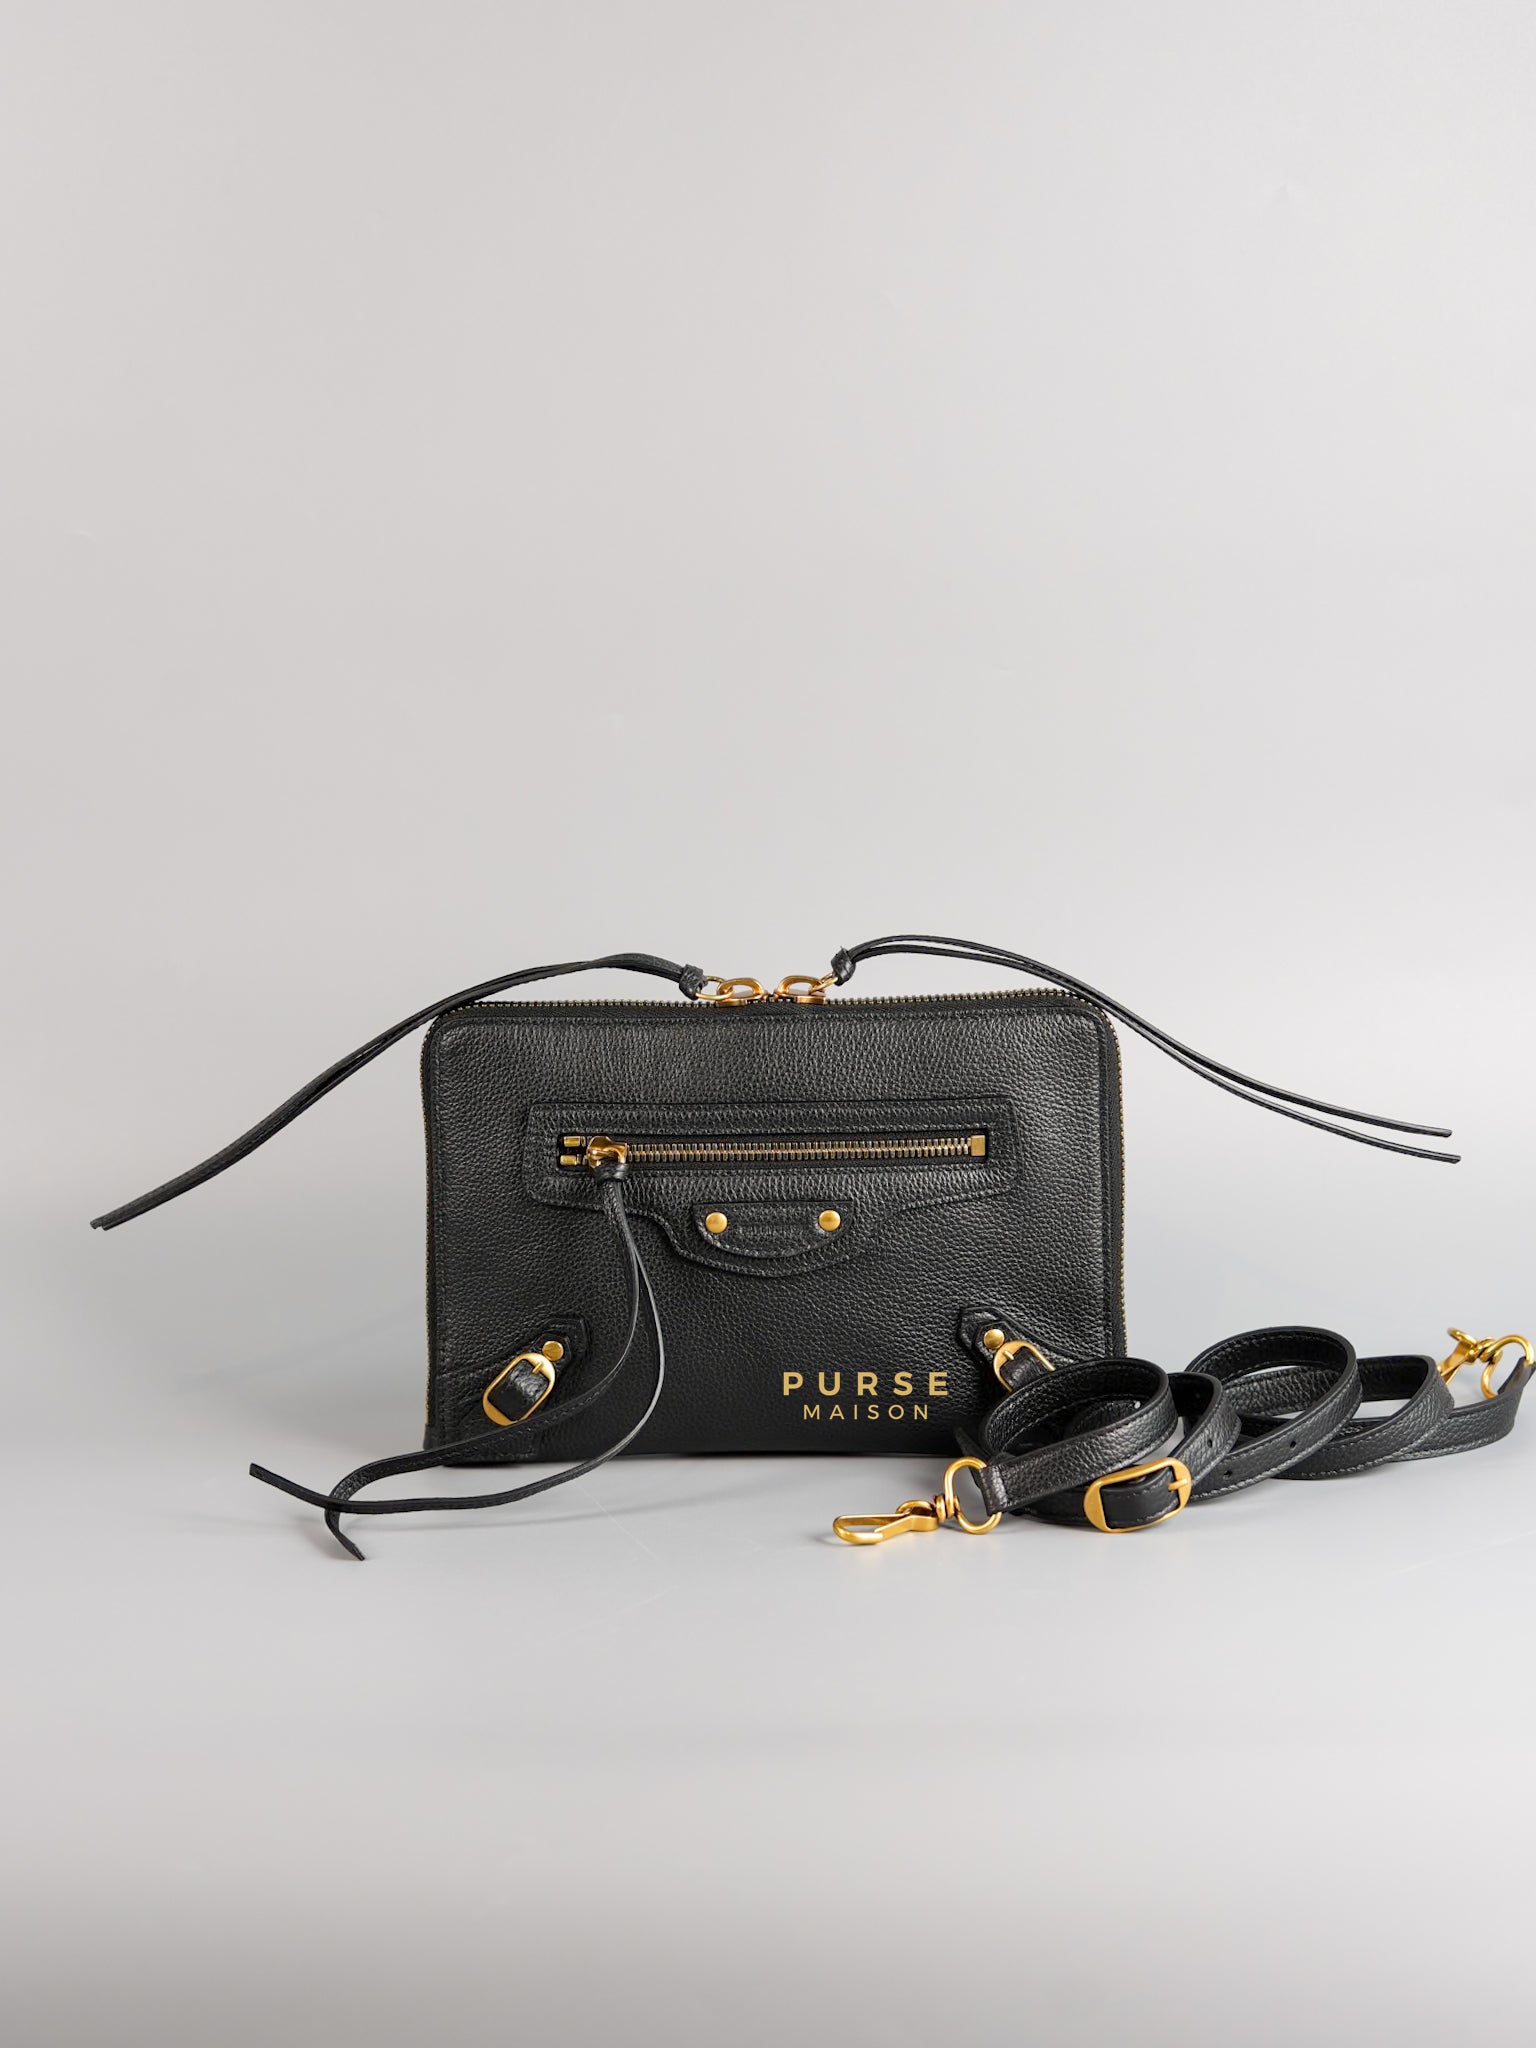 Neo Classic Sling Bag in Black Leather & Gold Hardware | Purse Maison Luxury Bags Shop